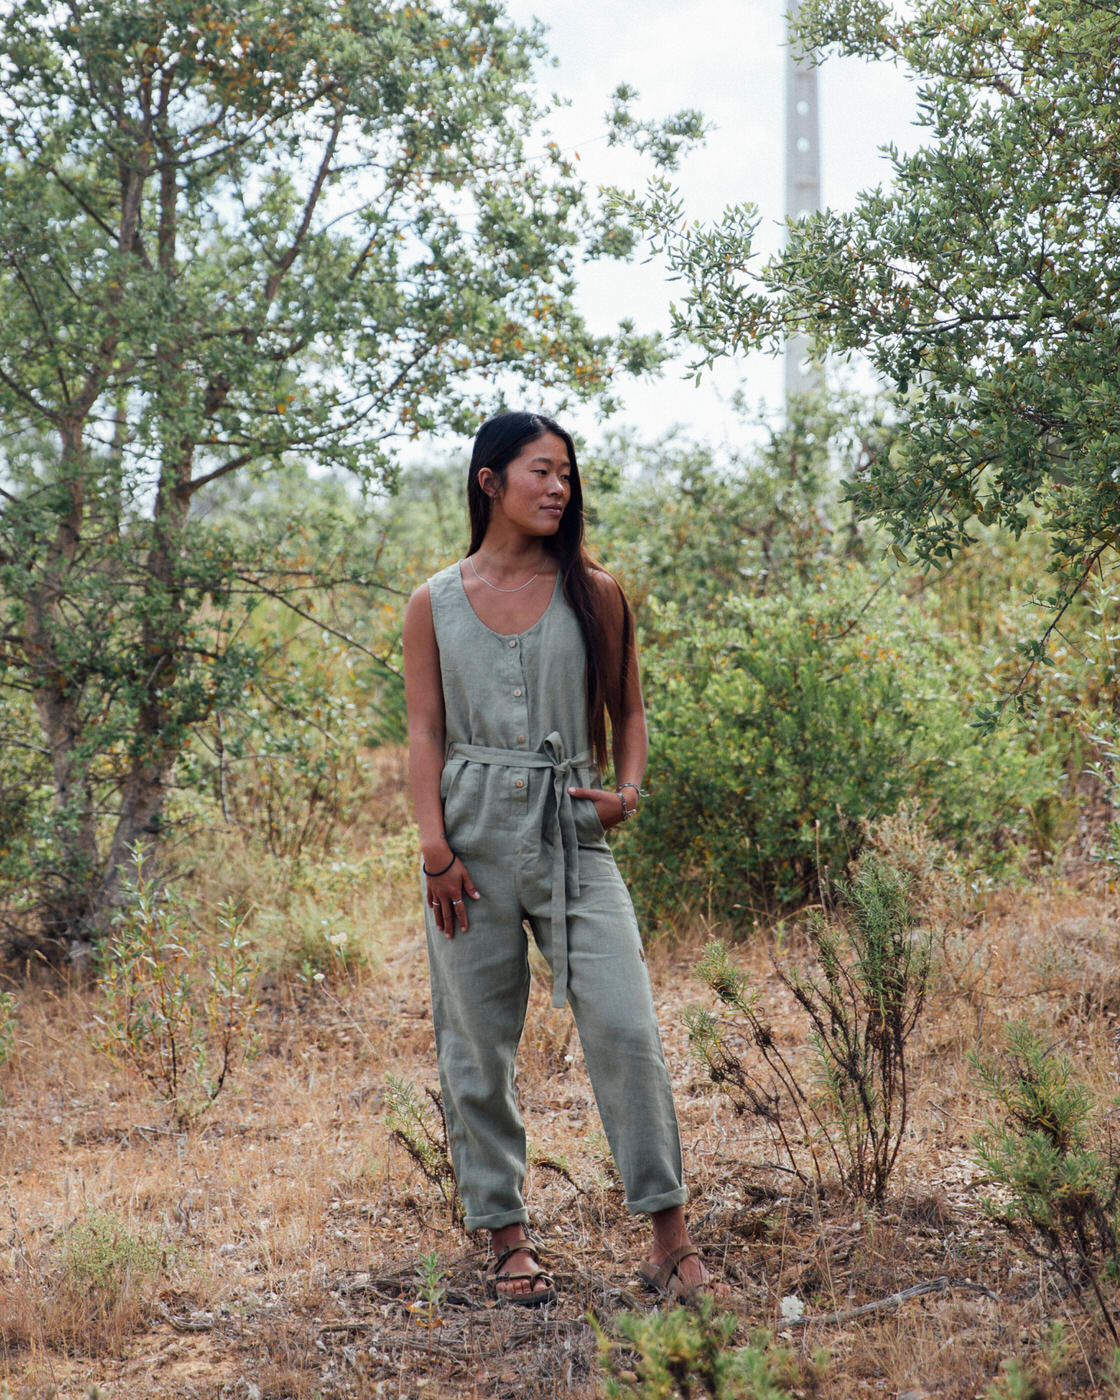 Green overall willow made of linen by Matona